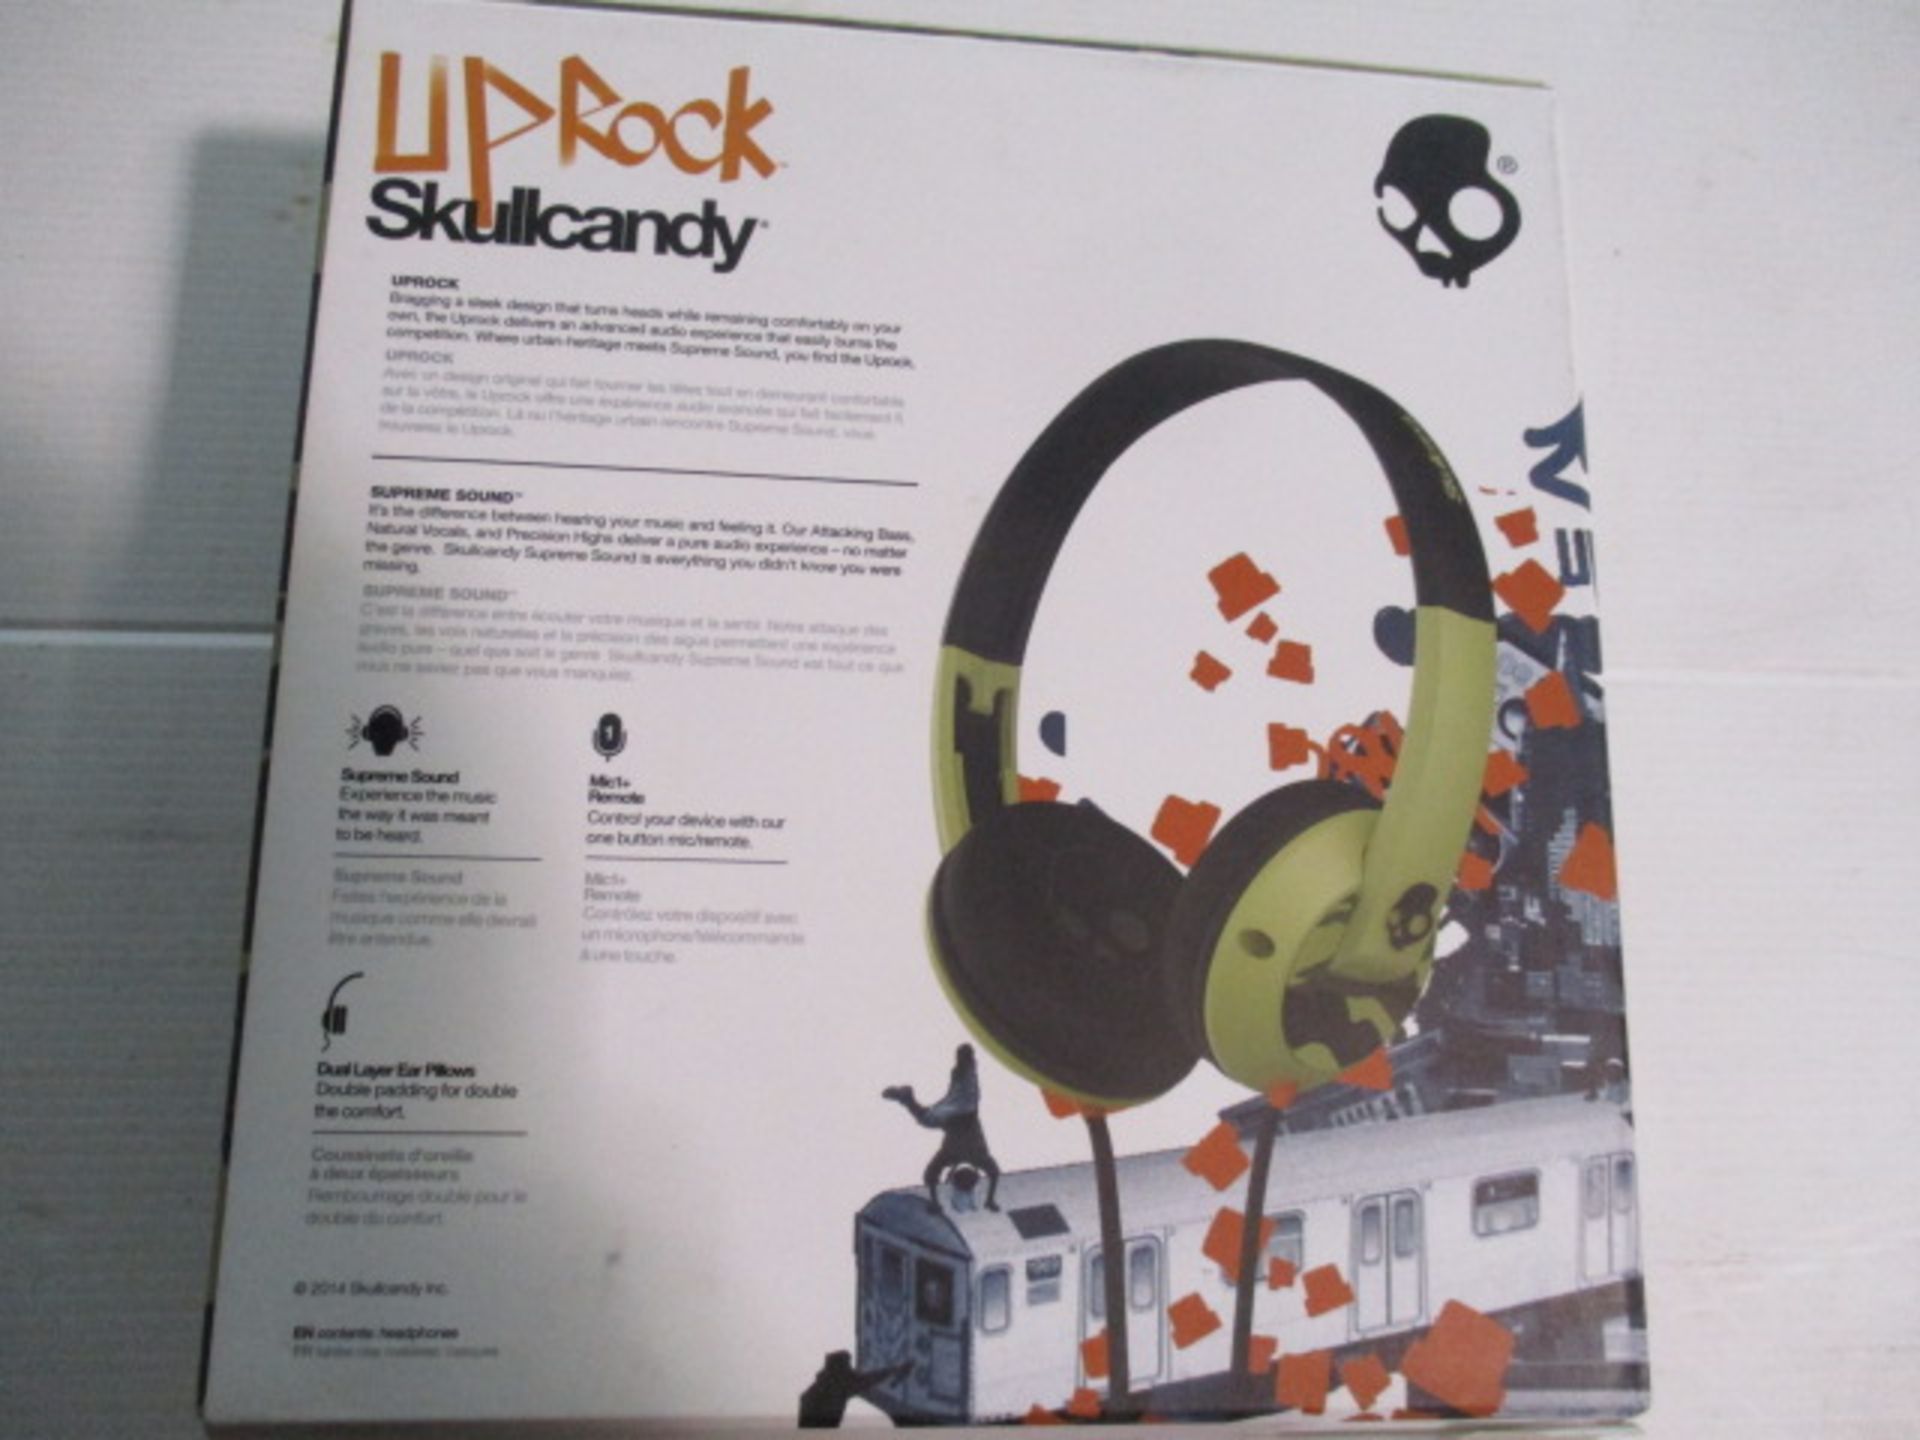 SkullCandy Uprock Headfones boxed and unchecked - Image 2 of 2